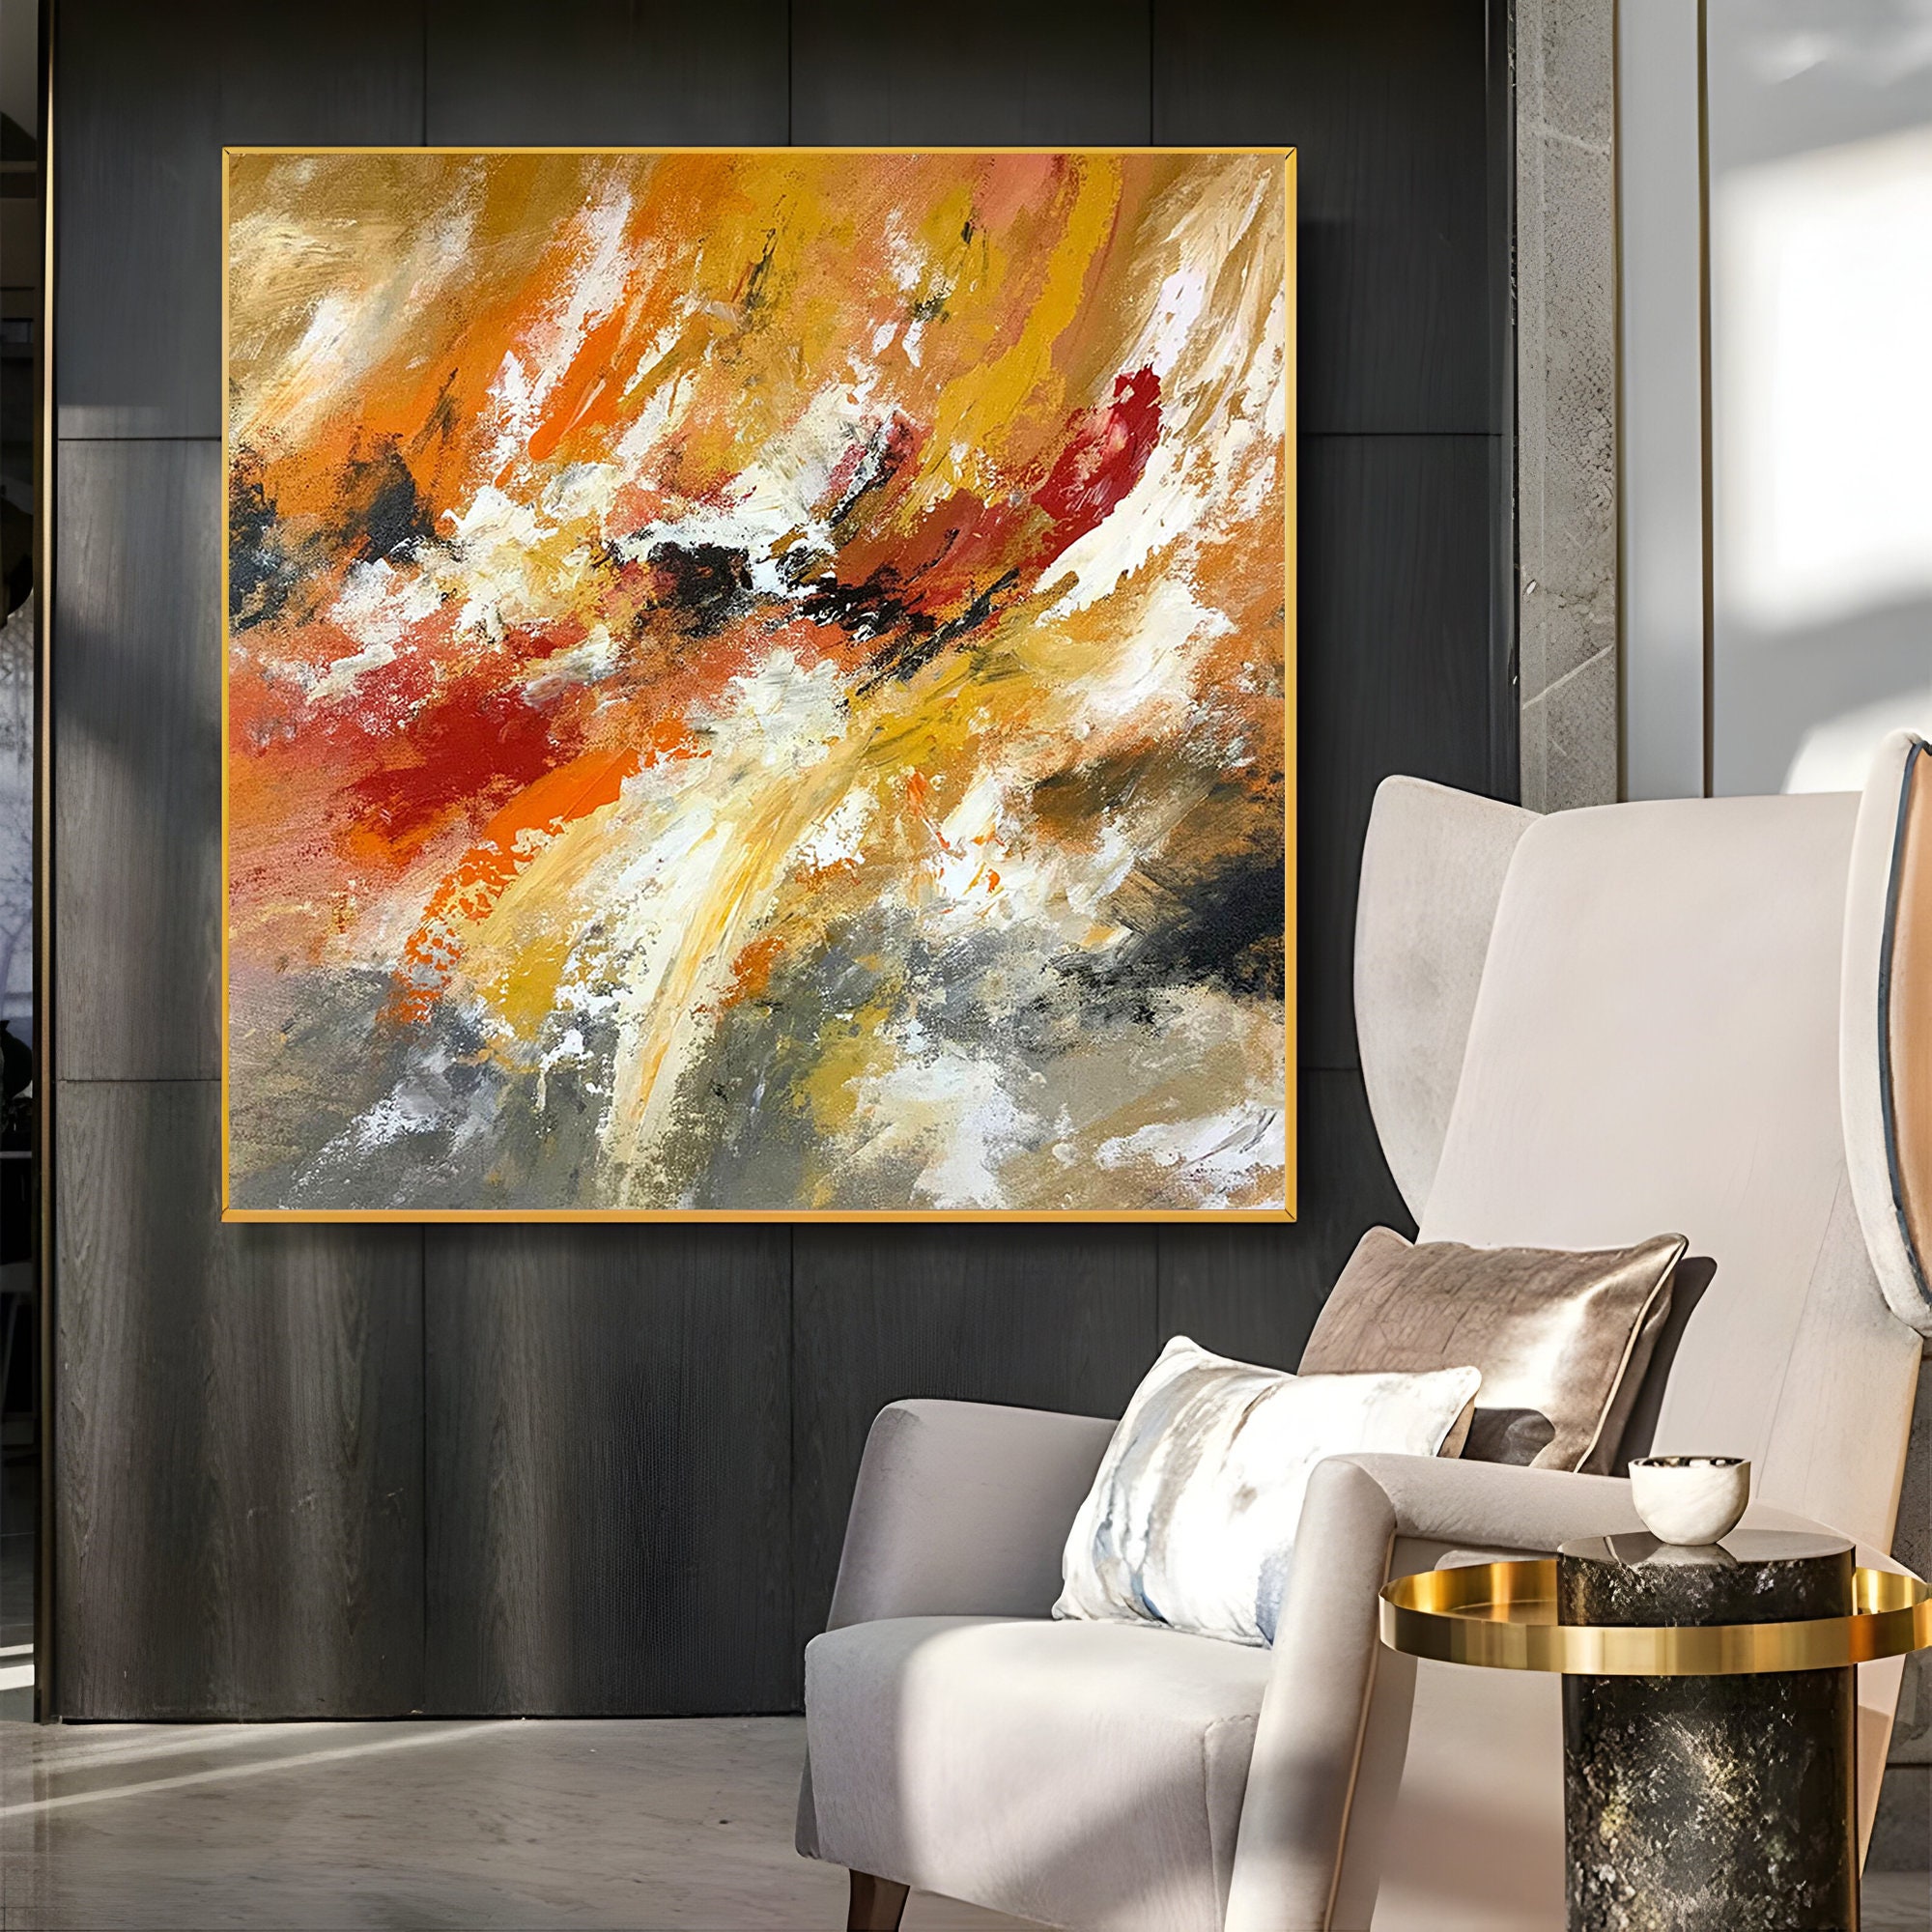 Acrylic Painting, Canvas Abstract, Abstract, Wall Decor, Large oil painting,  Acrylics paint, Big Abstract Art, Art [pat466] - $199.00 : Handmade Large  Abstract Painting On Canvas